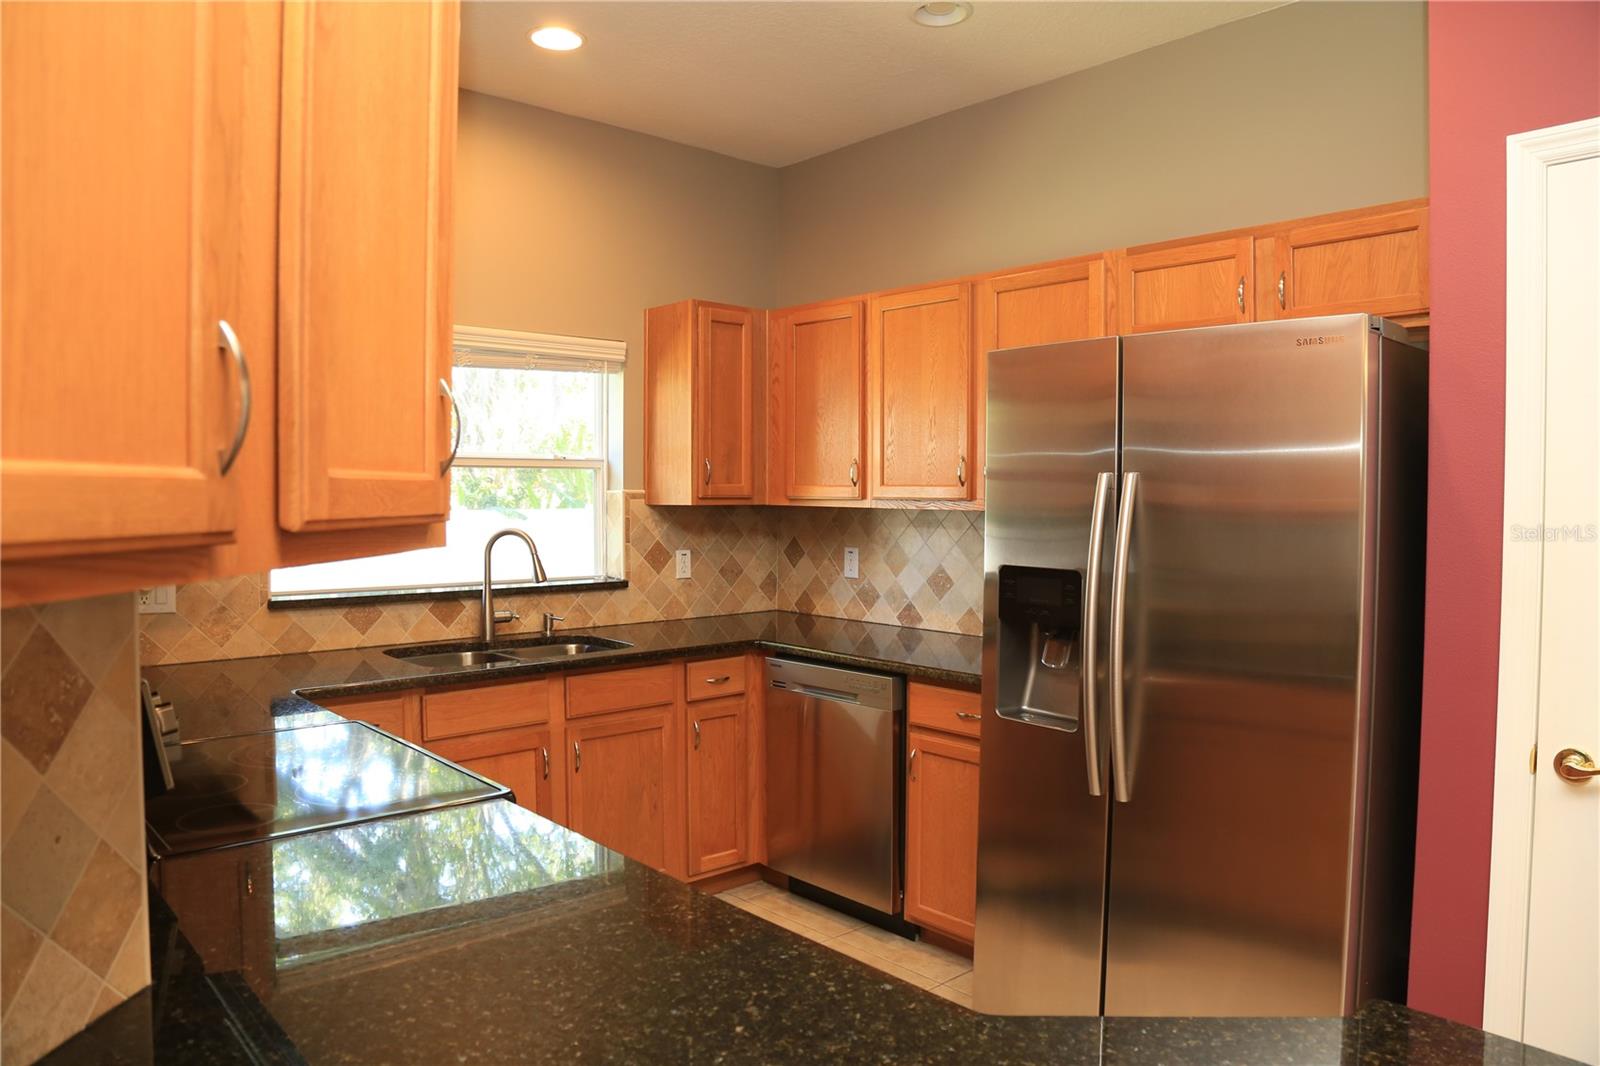 Kitchen features Oak wood cabinets, Granite countertops & Stainless steel appliances